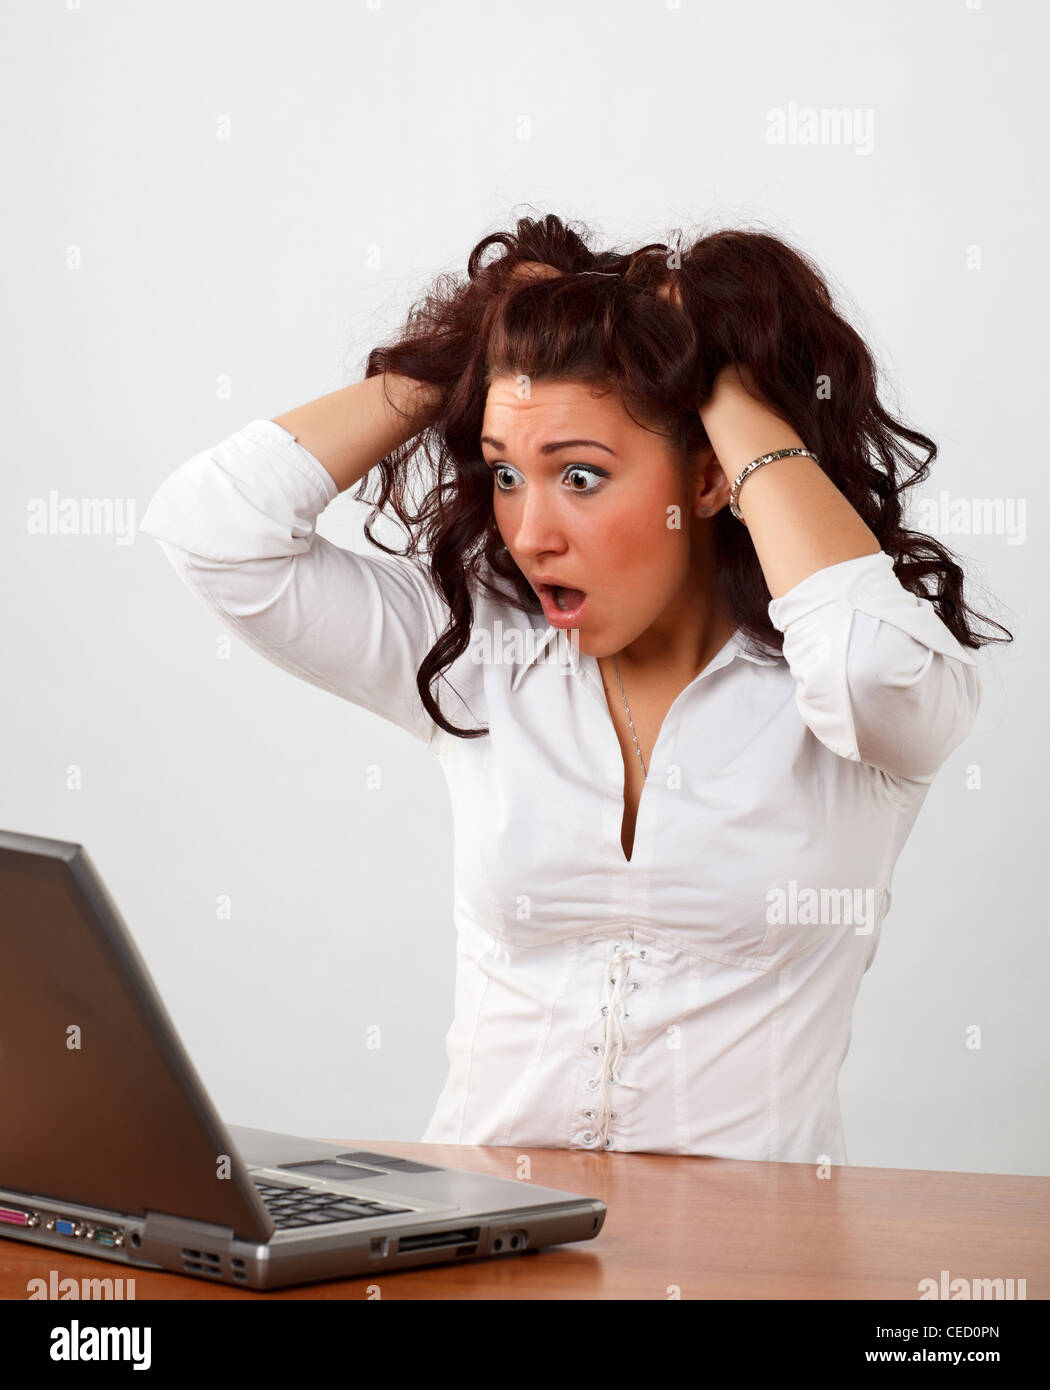 Young woman surfing the Internet on a laptop. Stock Photo